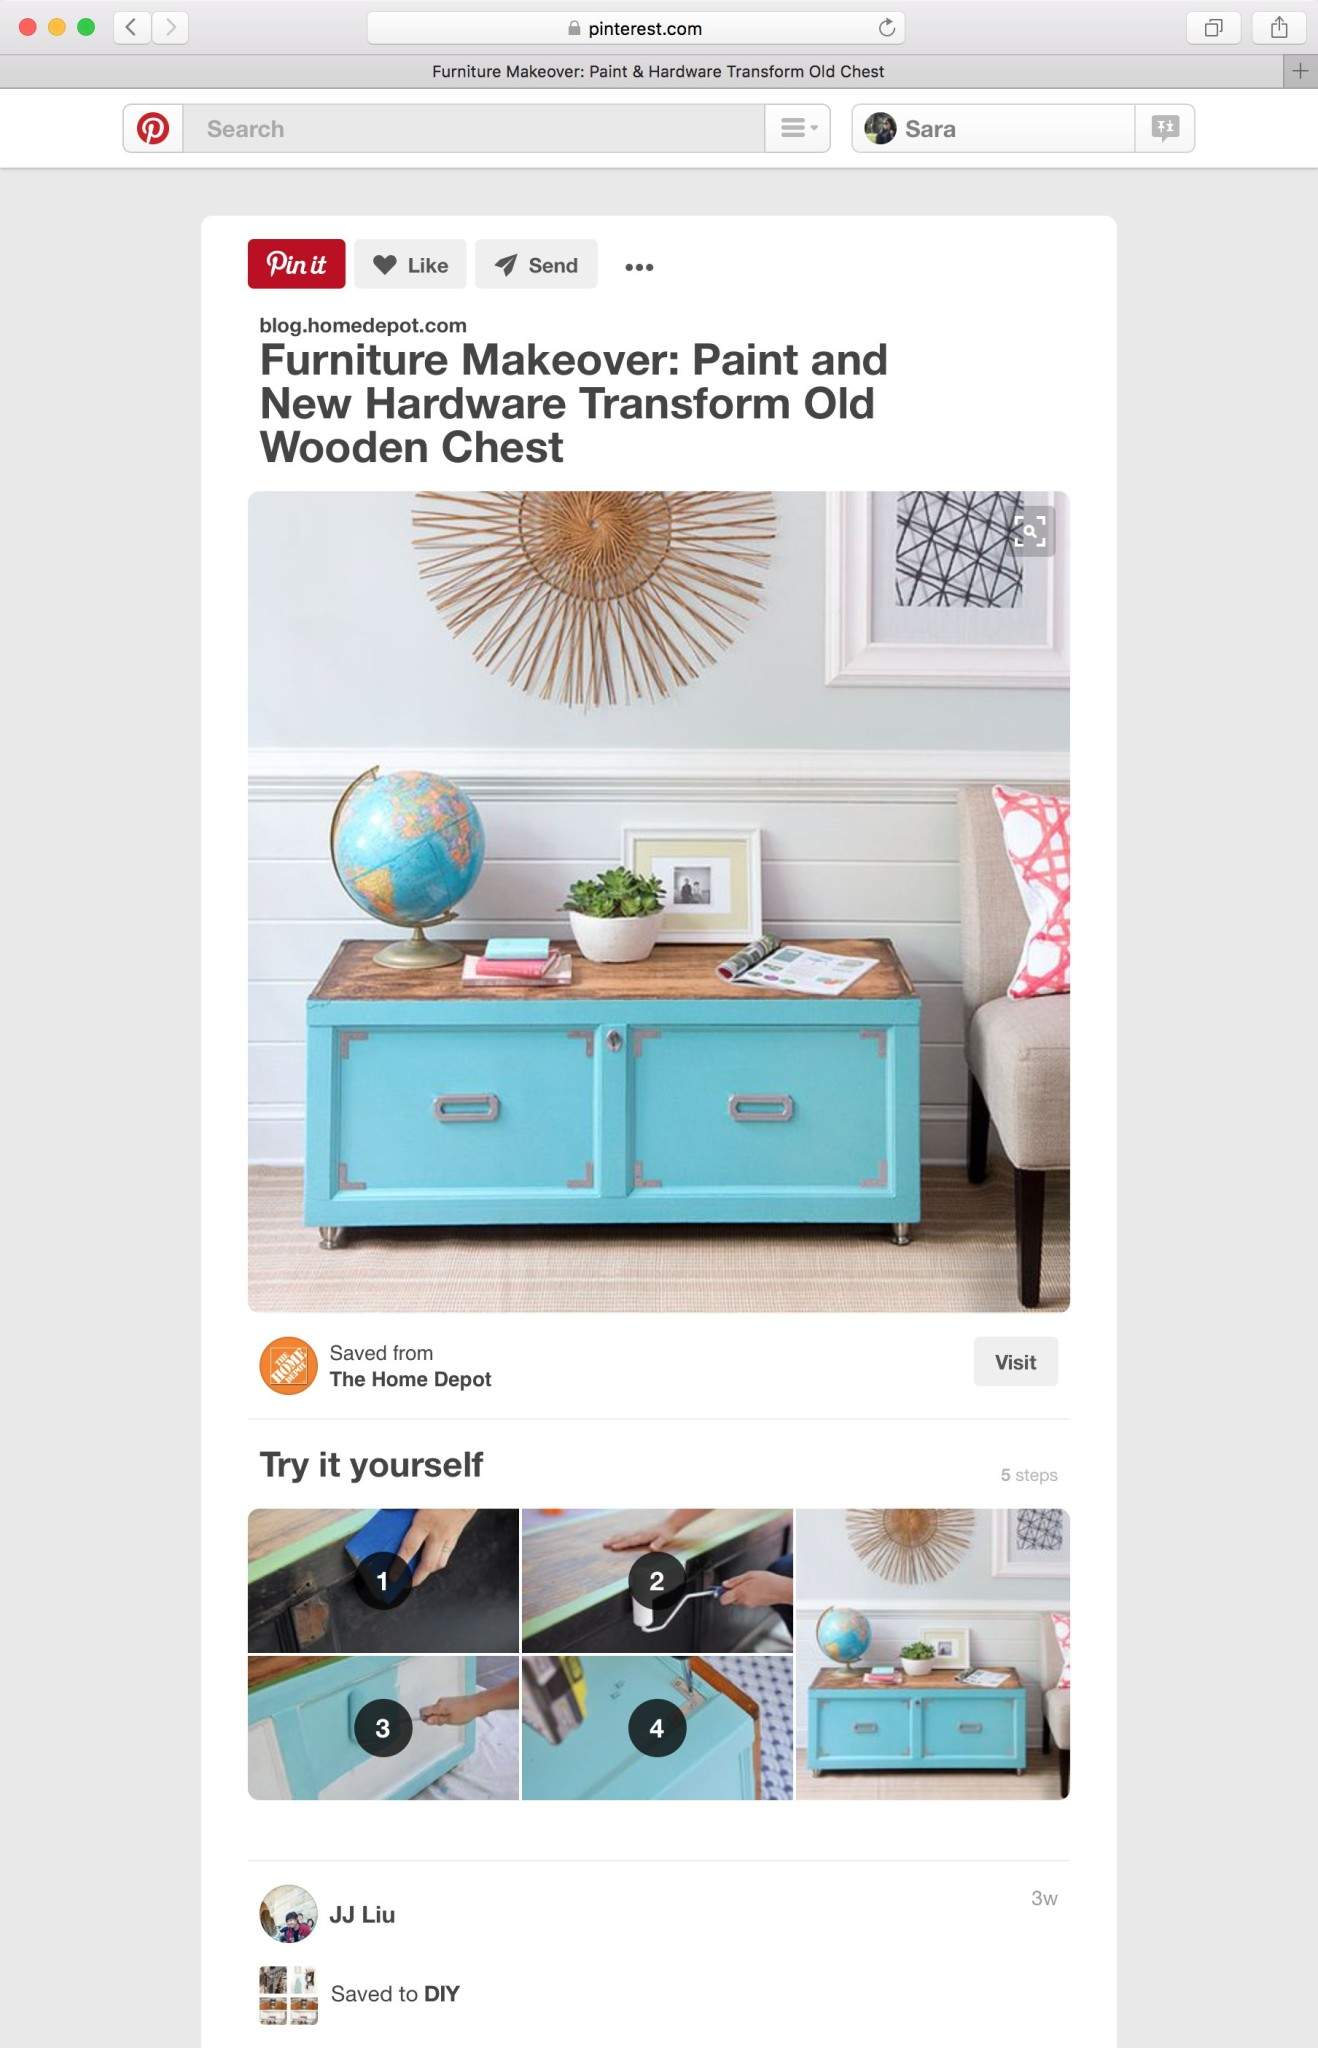 Pinterest Launches How-To DIY Pins